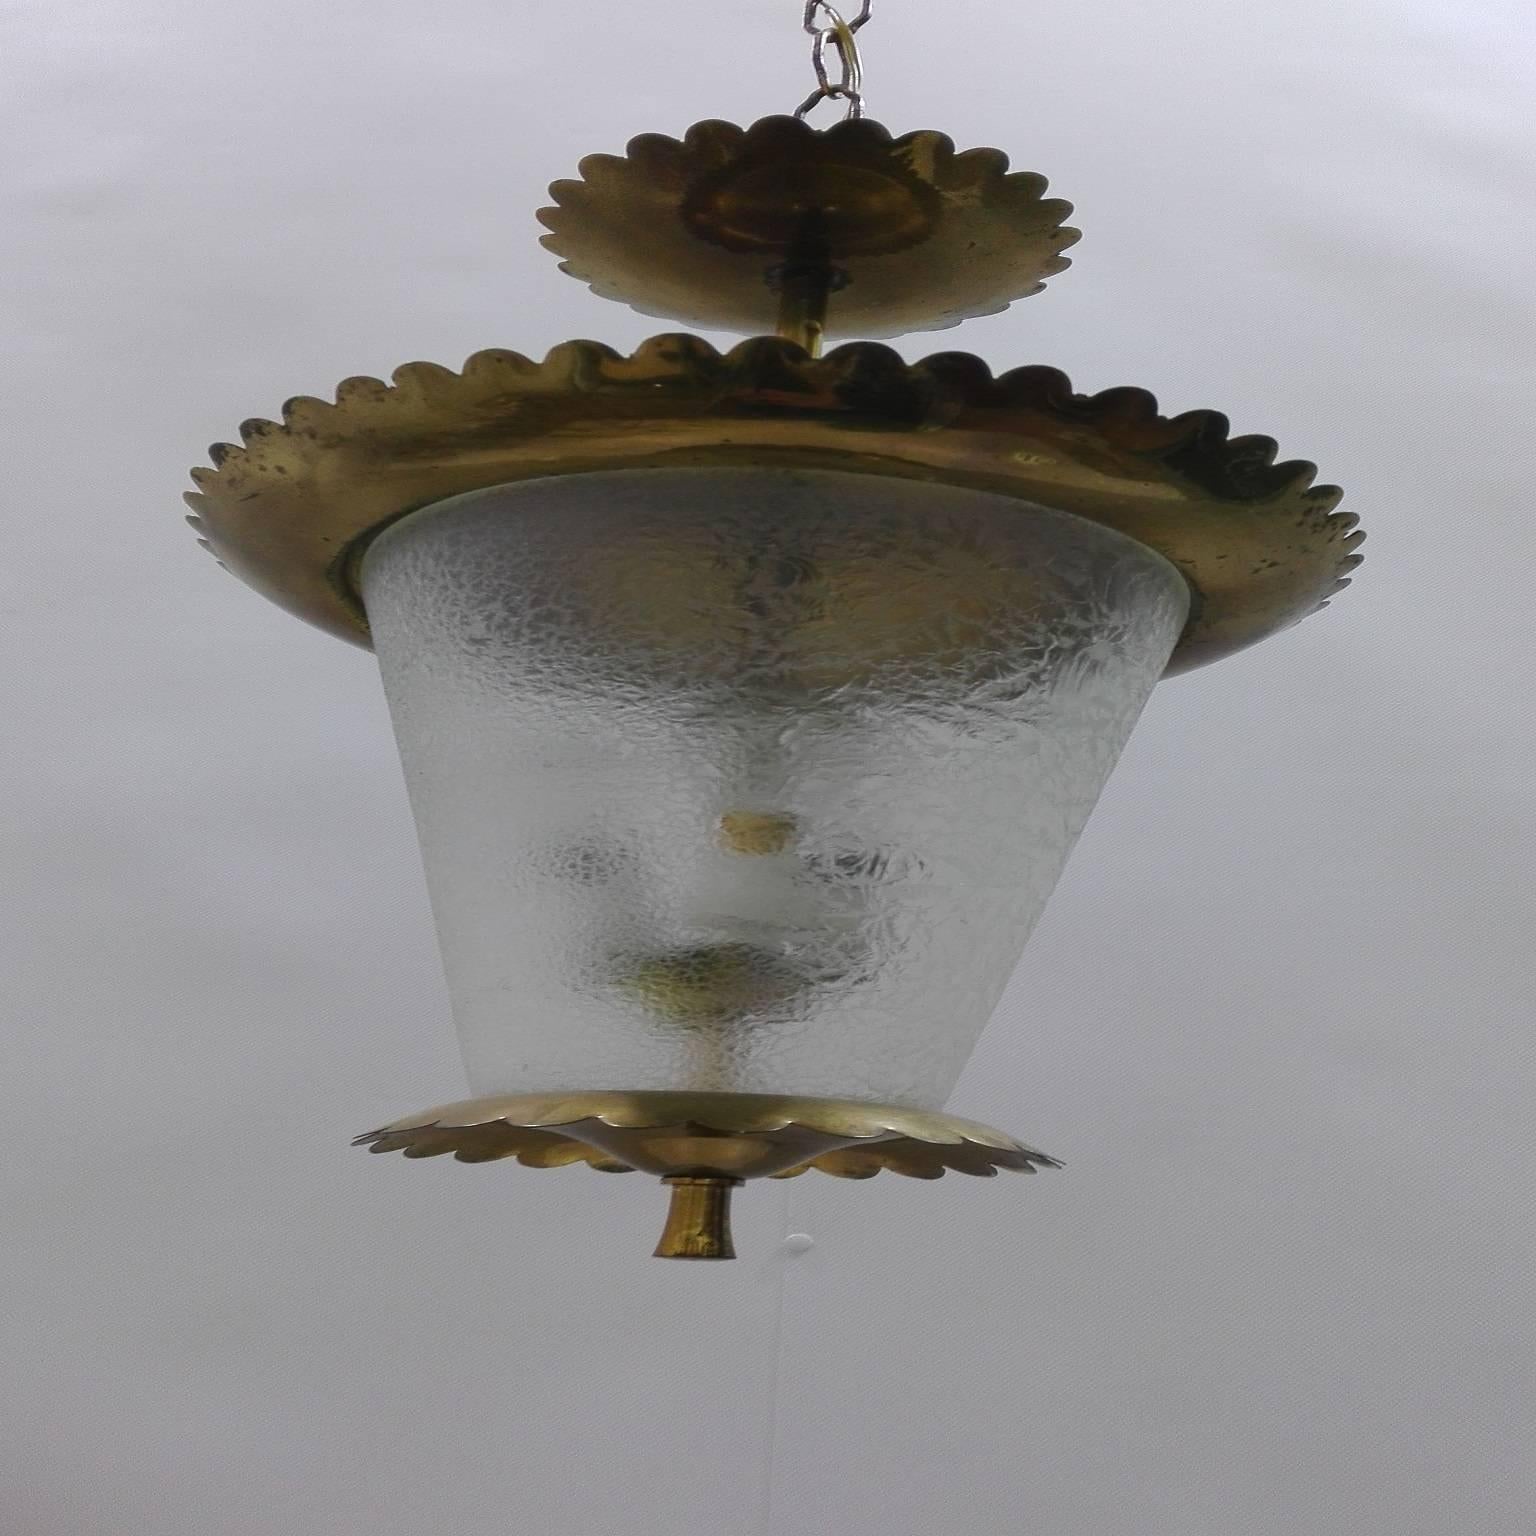 Chic Italian glass lantern / fixture by Pietro Chiesa and attributed to Fontana Arte in a glass White with bronze frame and details. The piece can be modified to flush mount, if desired.
 